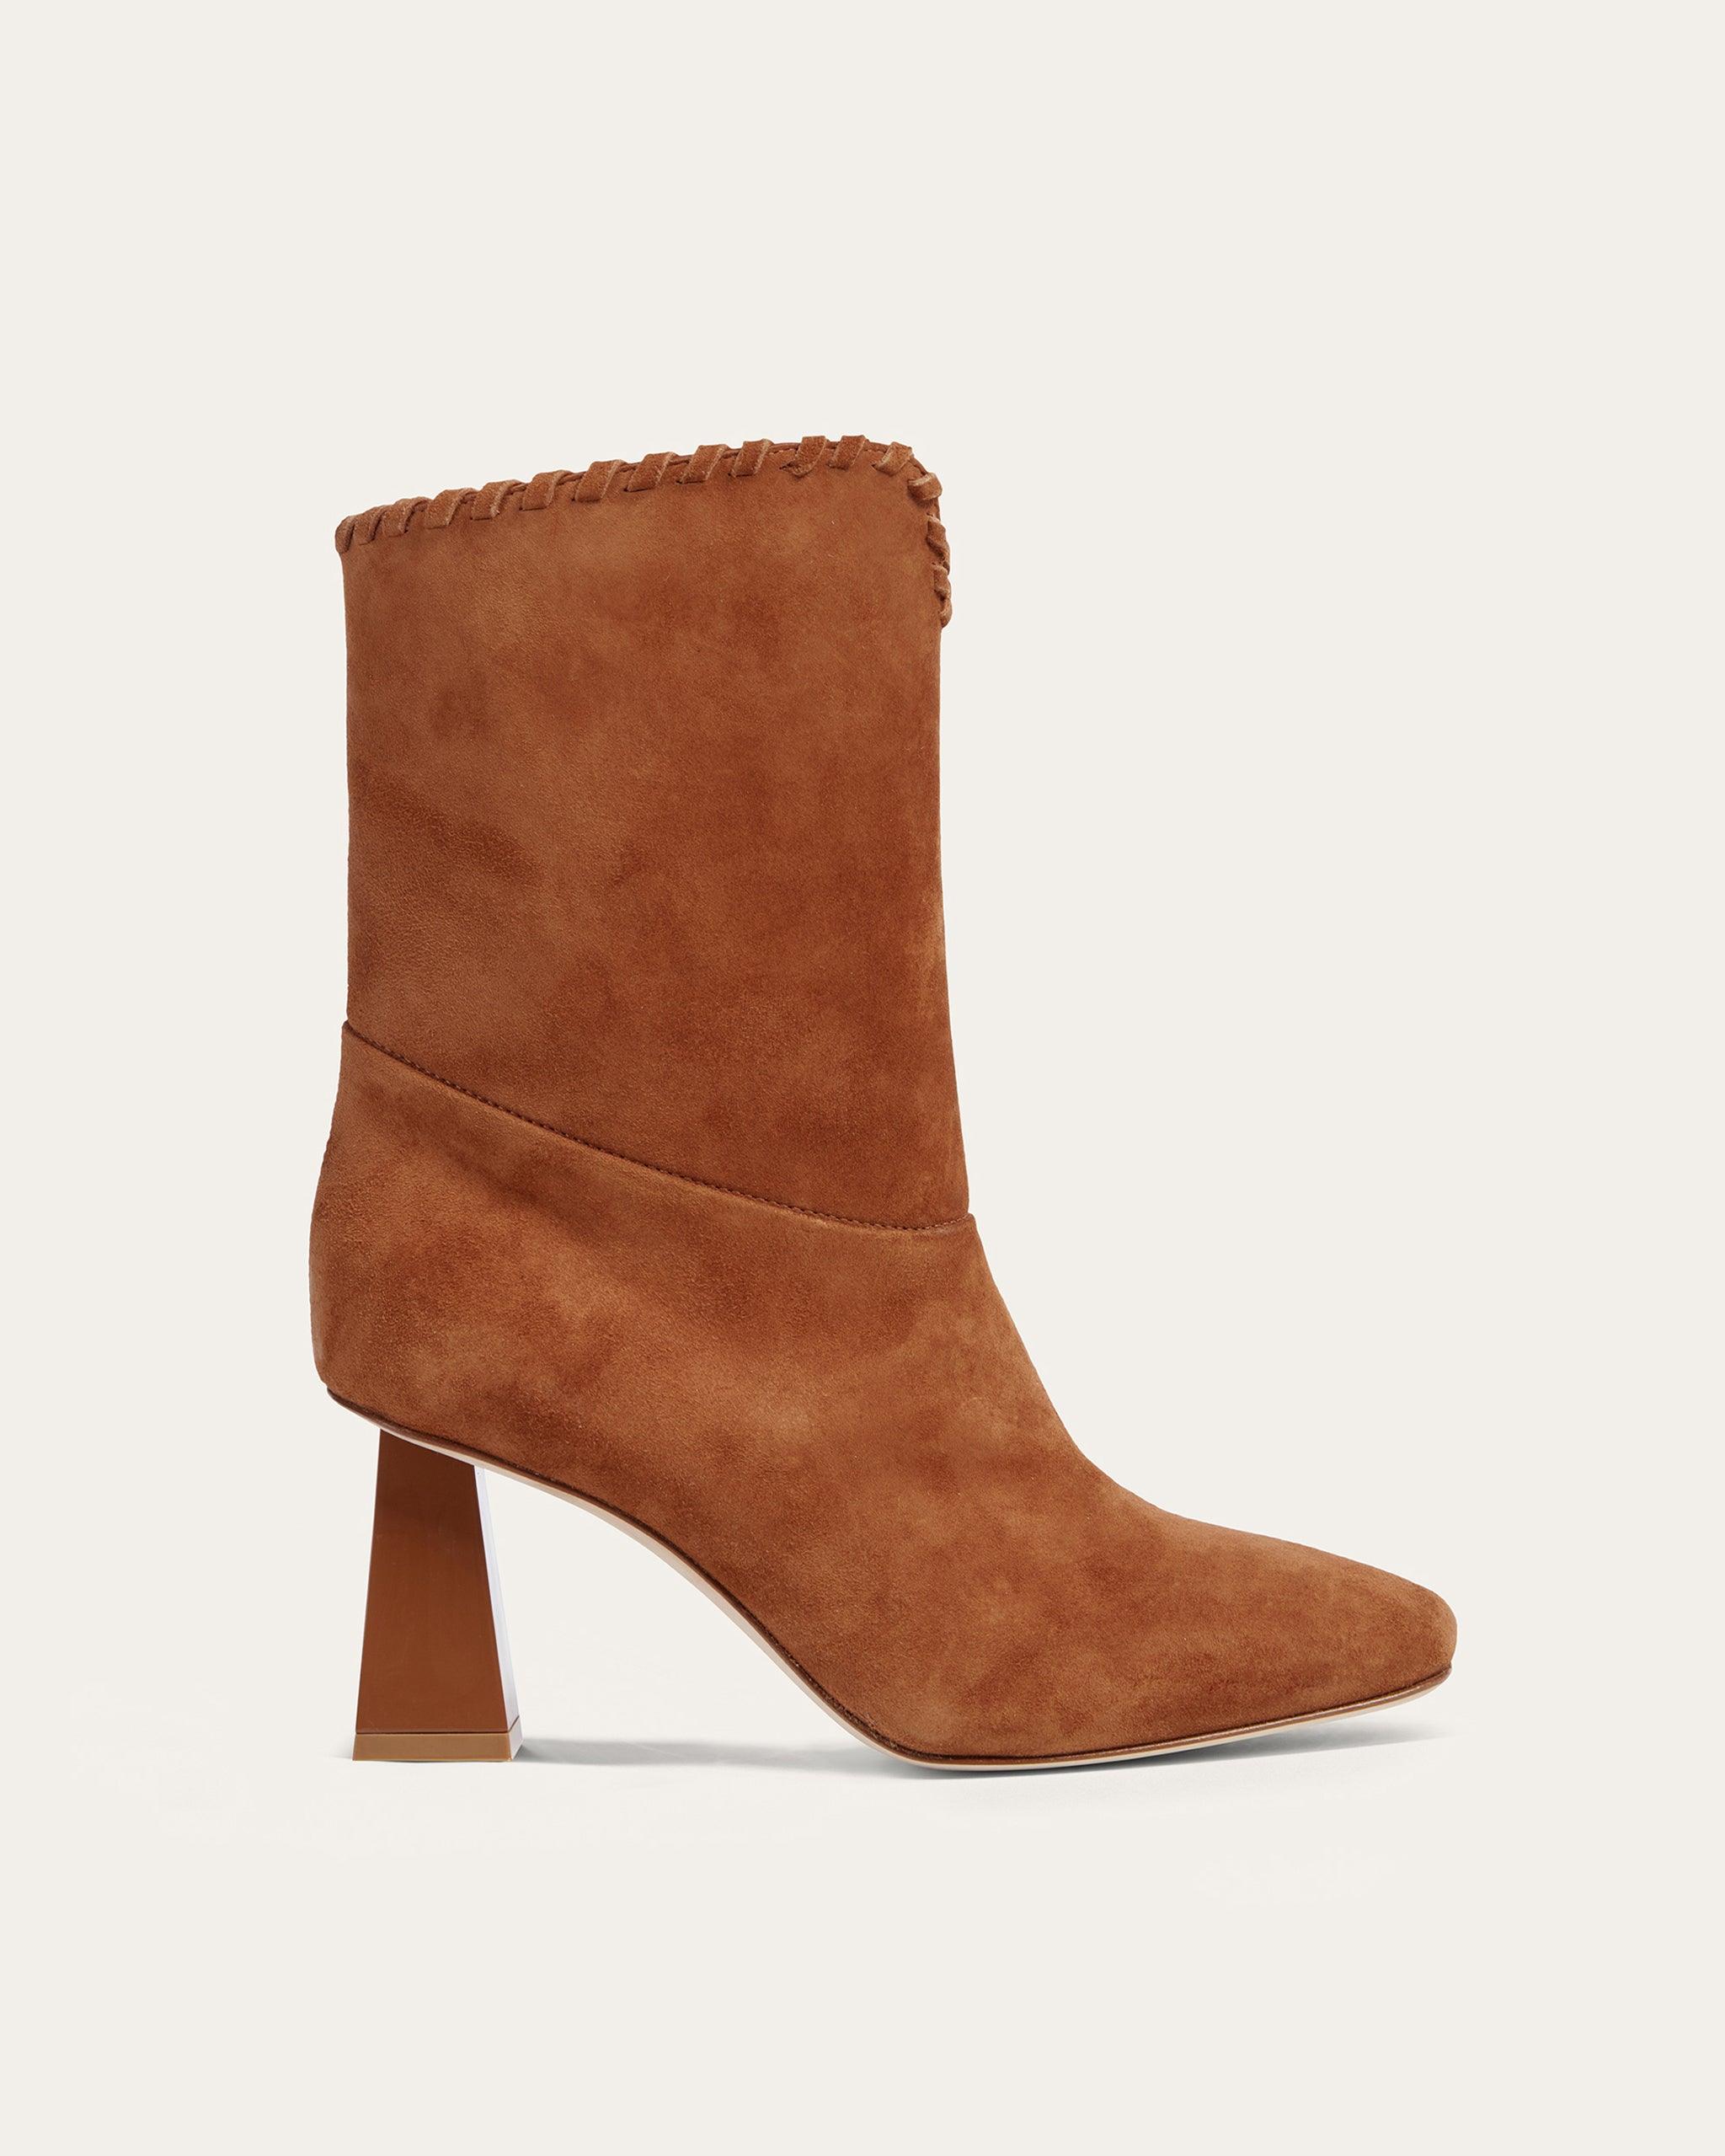 Image of Cher Boot, Tan